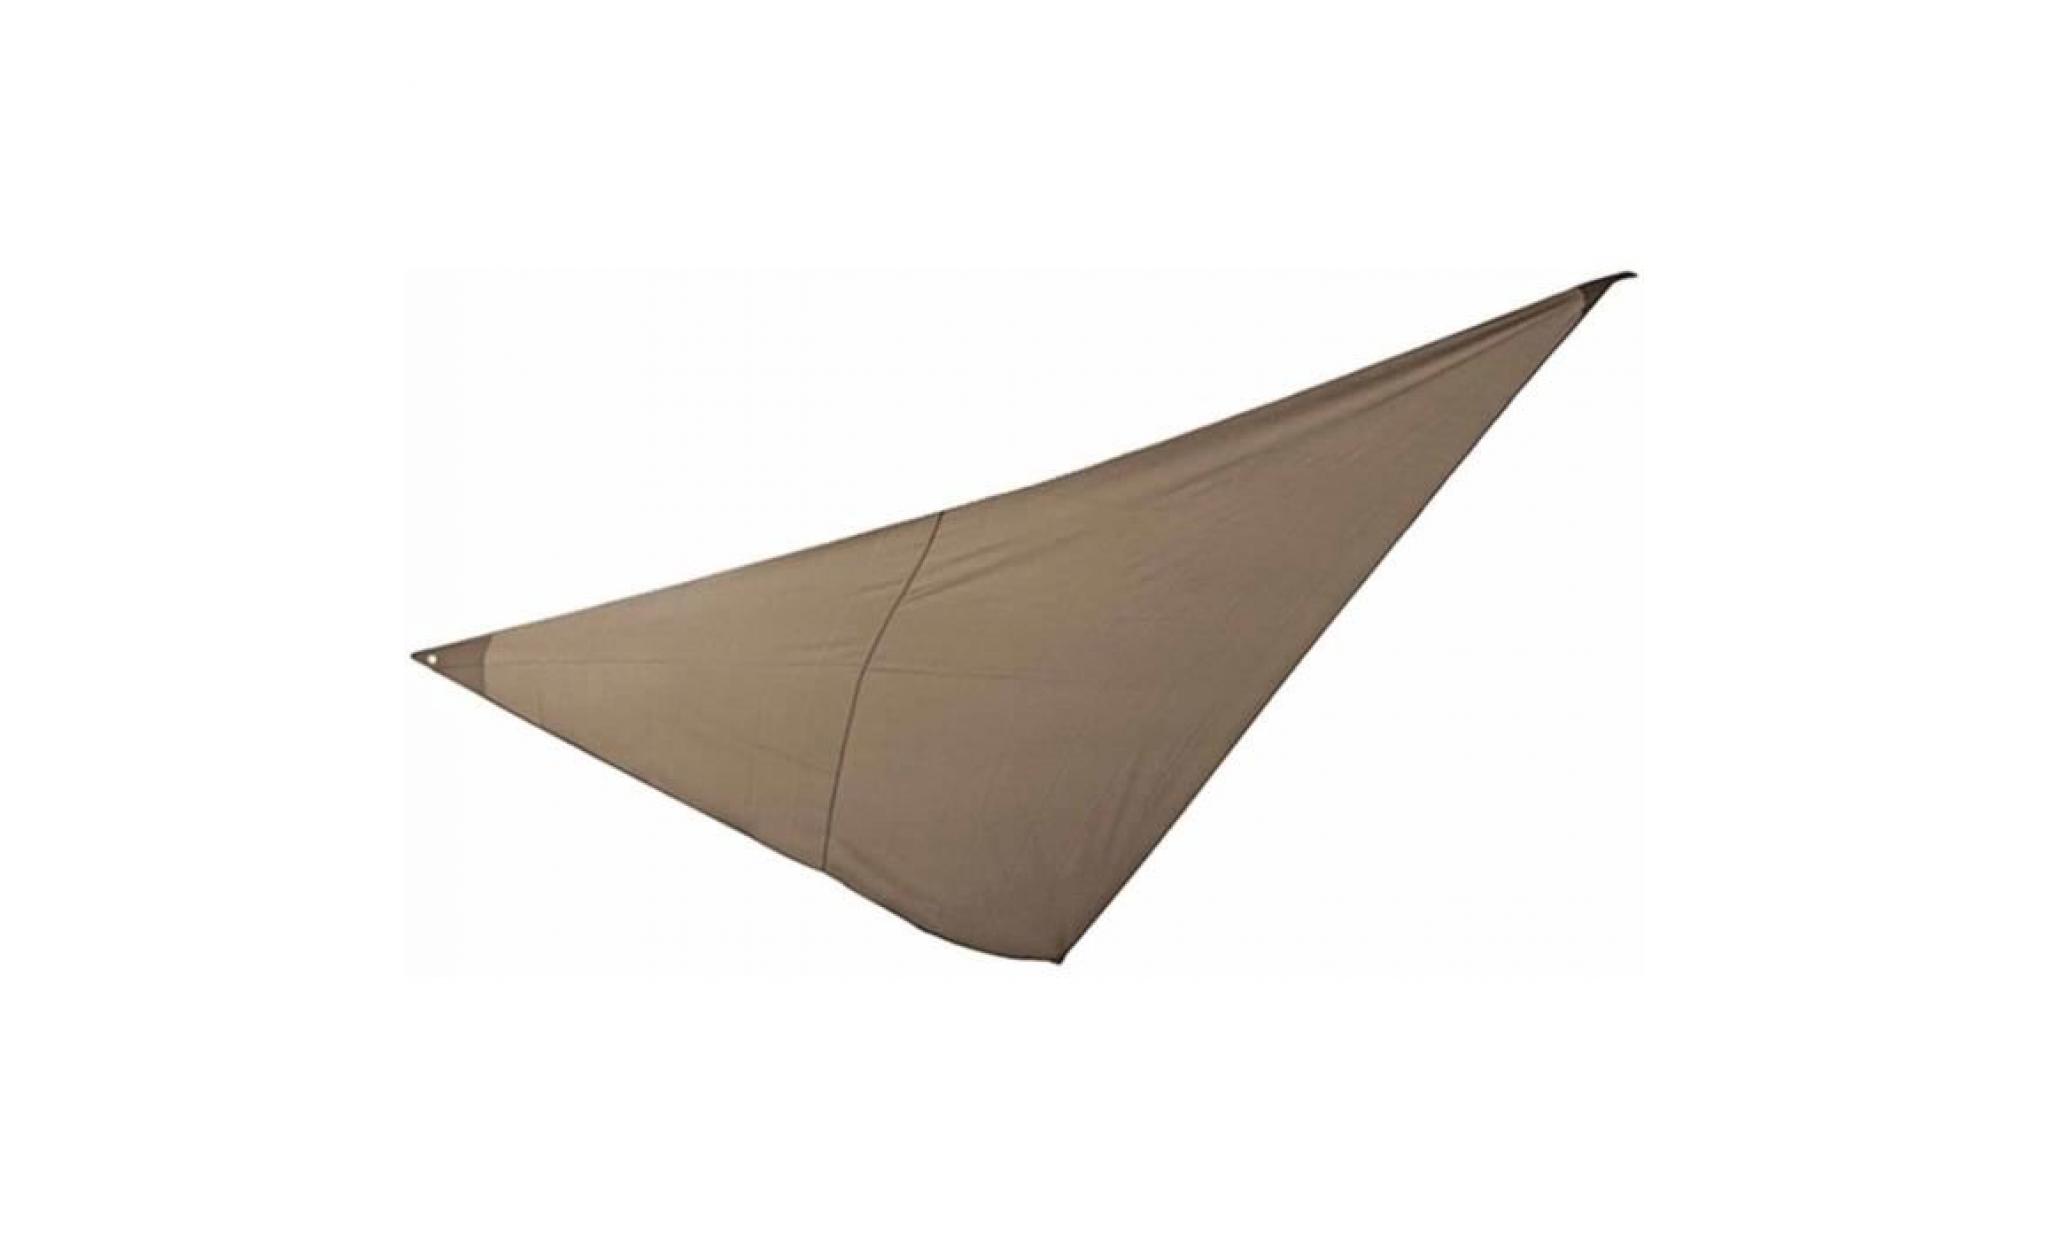 voile d'ombrage triangulaire en polyester coloris taupe   dim : 2 x 2 x 2 m